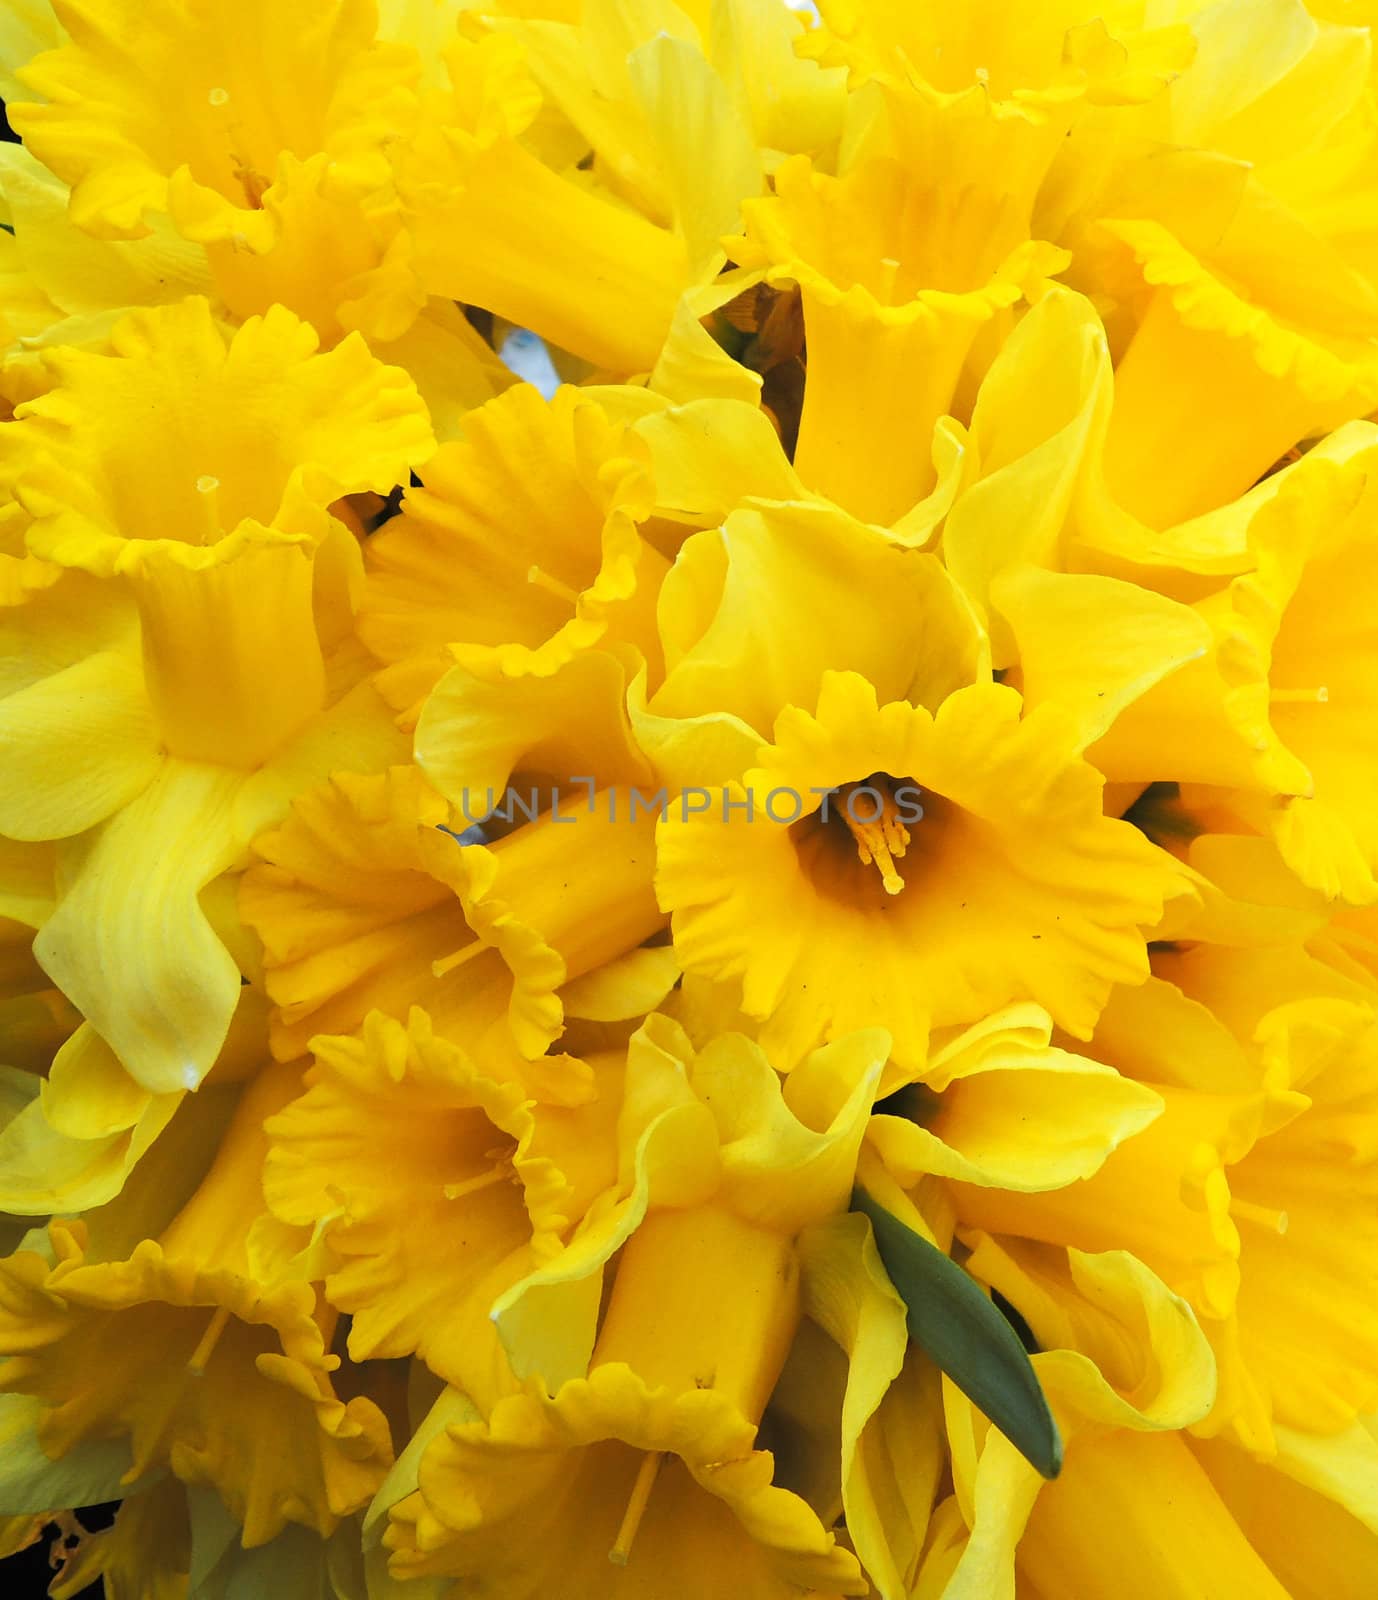 Yellow narcissus by MalyDesigner